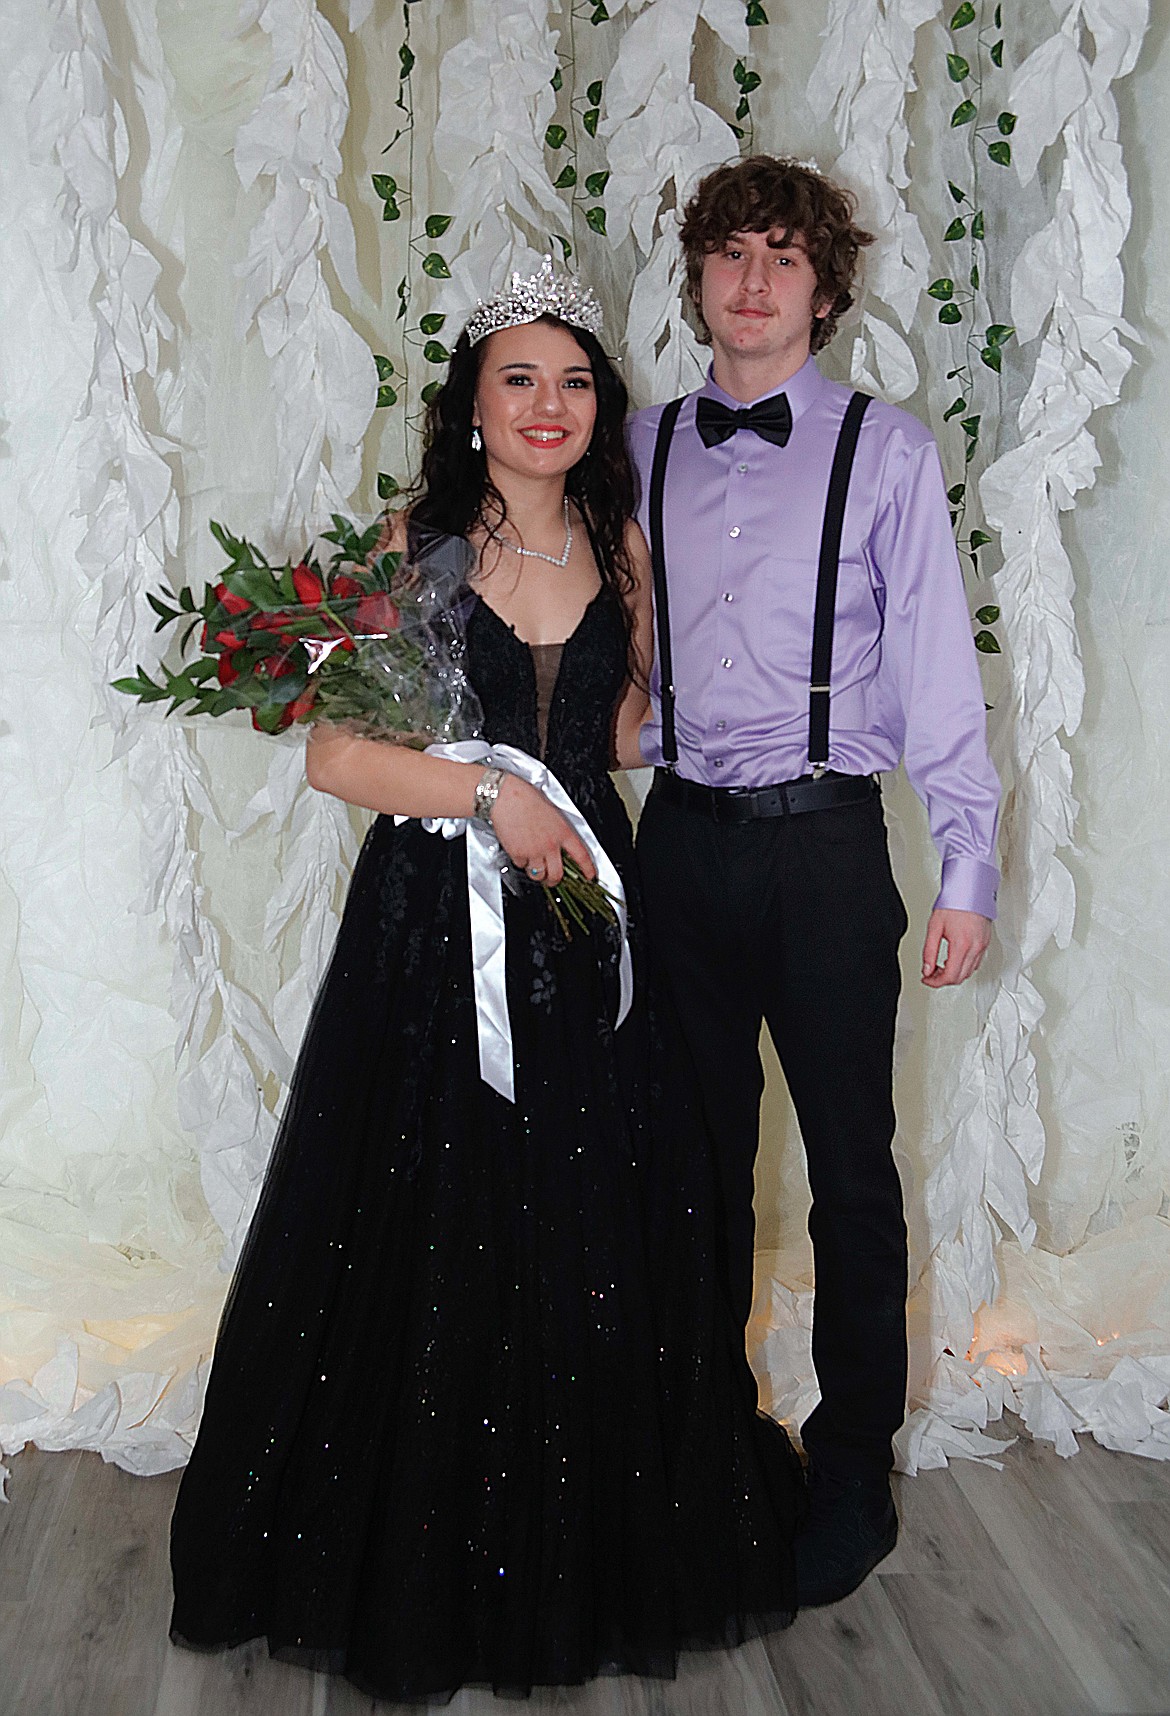 Plains High School prom king and queen Aaron Pfister and Carlie Wagoner. (Jessica Peterson photo)